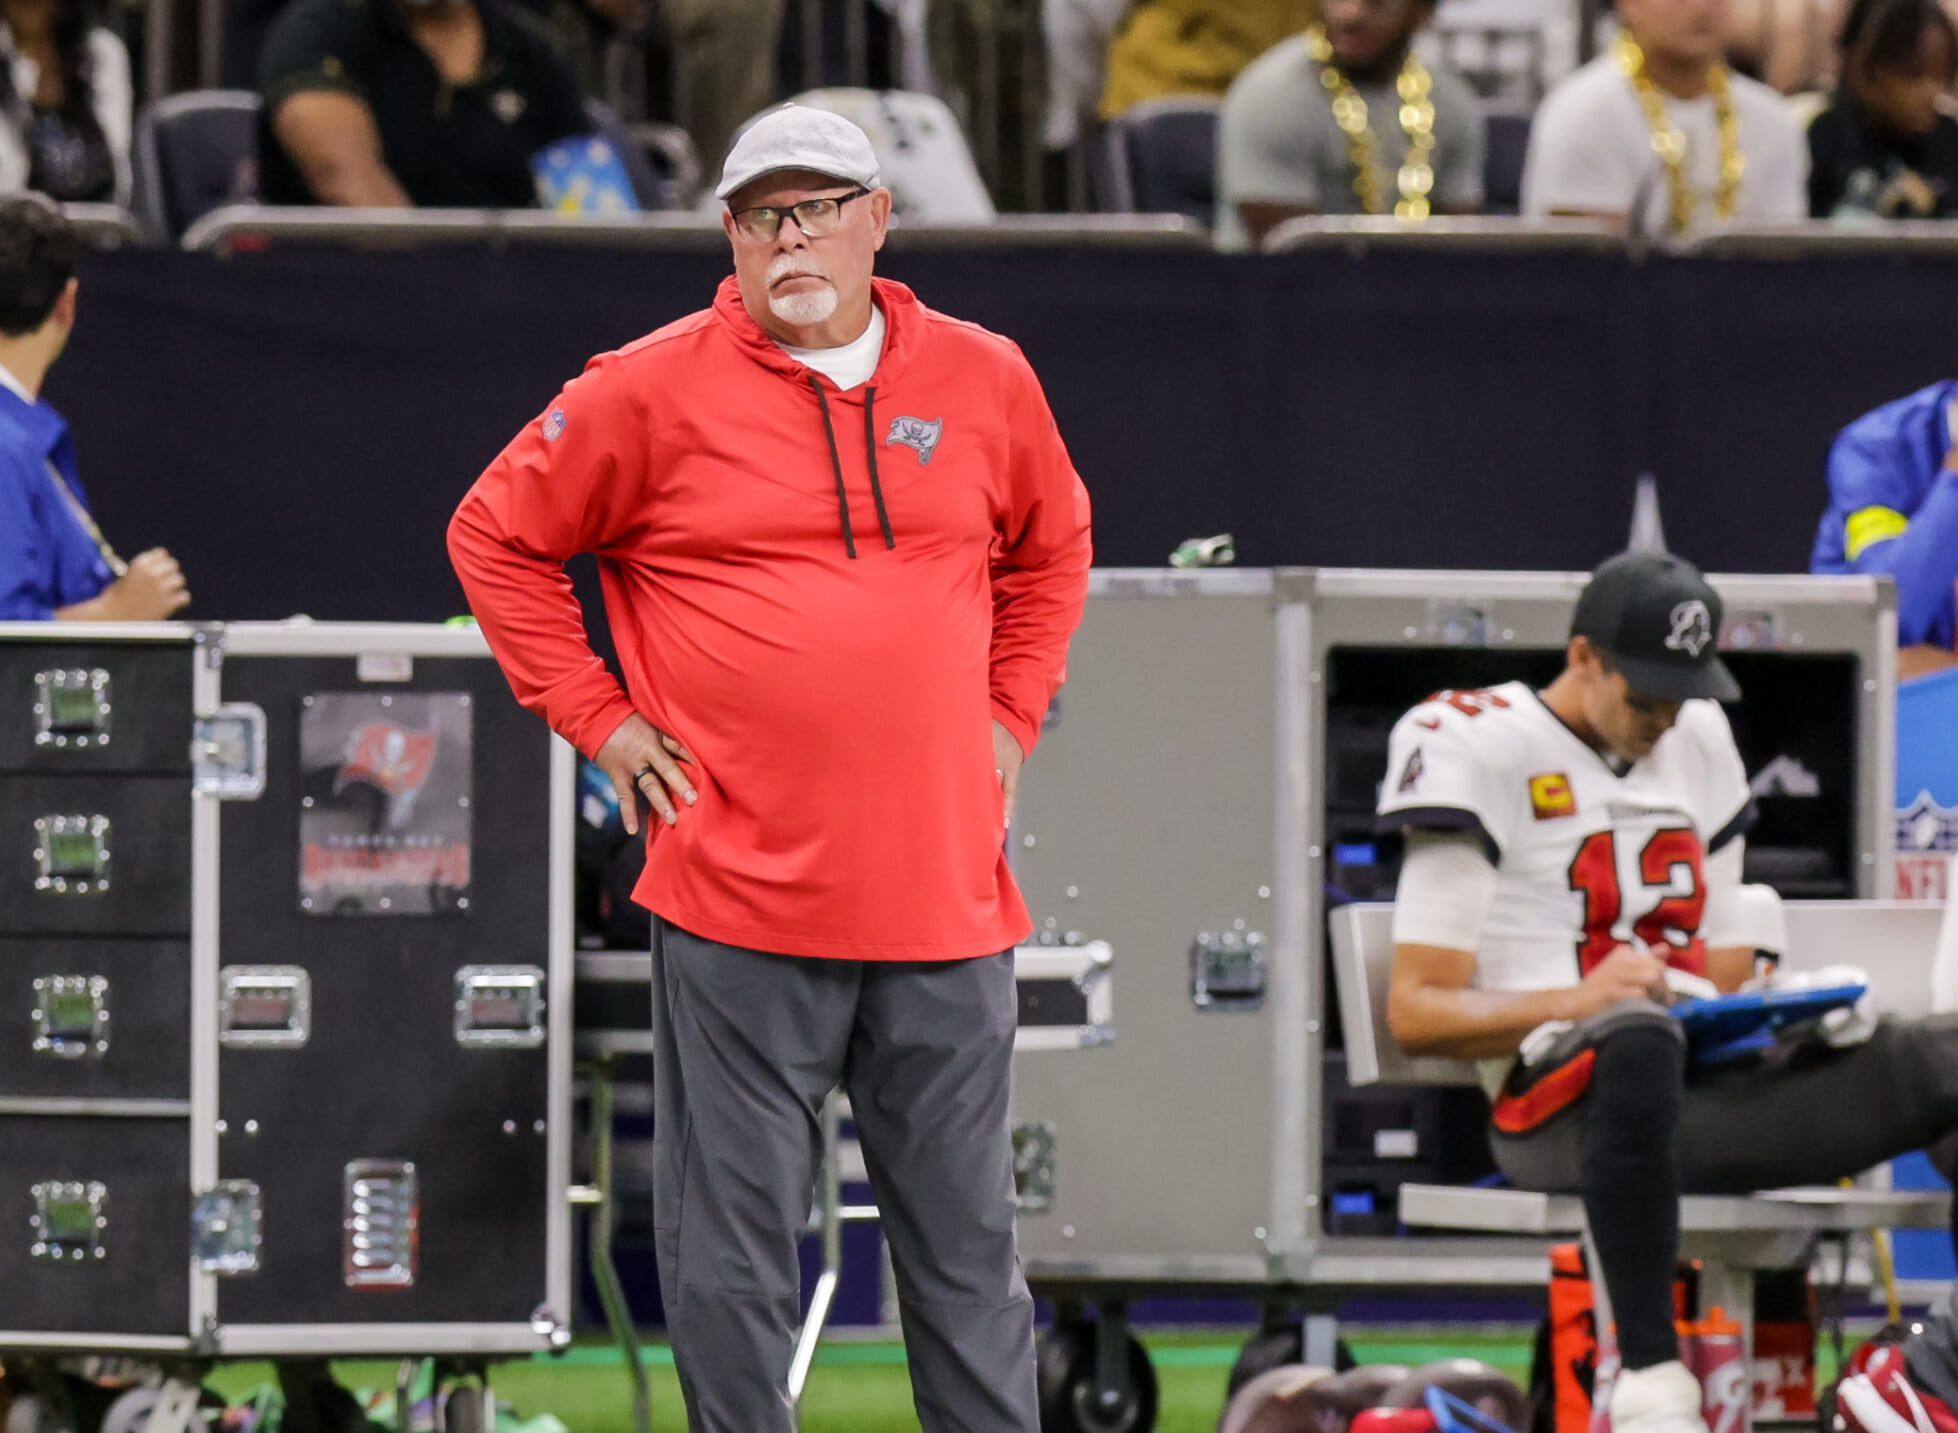 Tampa Bay Buccaneers senior advisor Bruce Arians reportedly warned by NFL after Week 2 antics